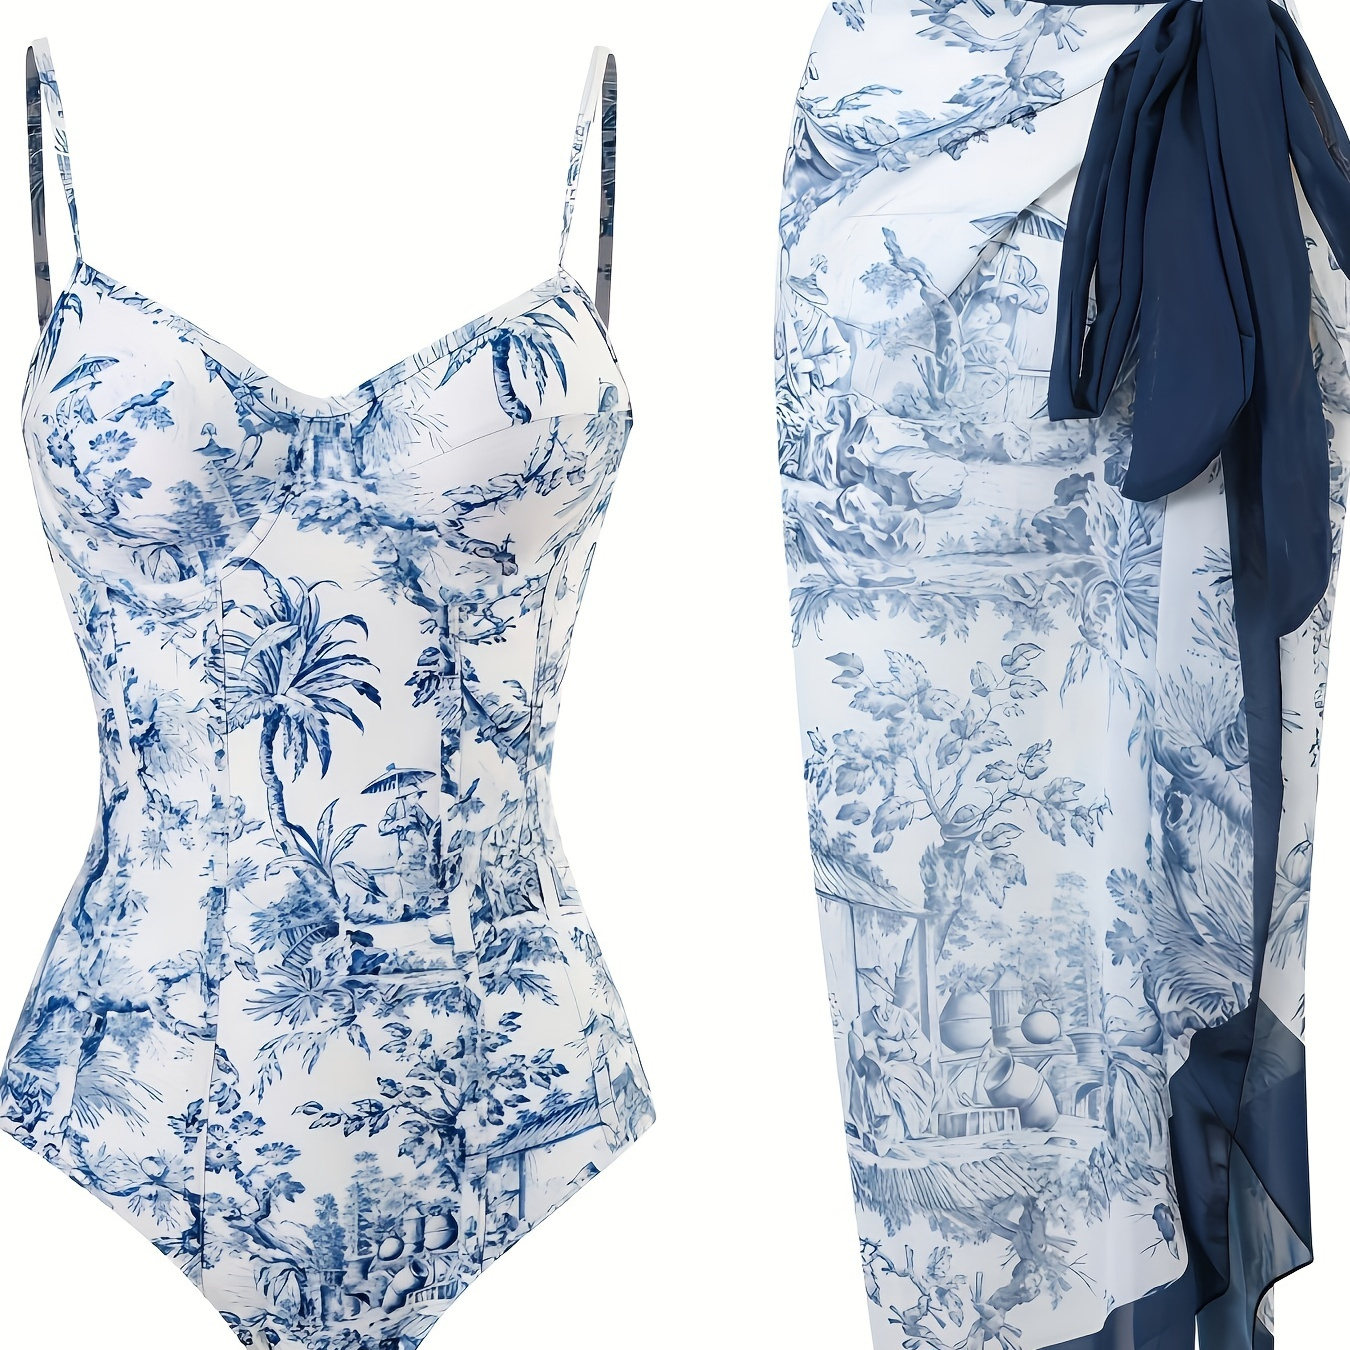 

Vintage Blue Chinoiserie Print Push Up 2 Piece Swimsuits, Spaghetti Strap Elegant One-piece Bathing-suit & Tie Side Cover Up Skirt, Women's Swimwear & Clothing For Holiday